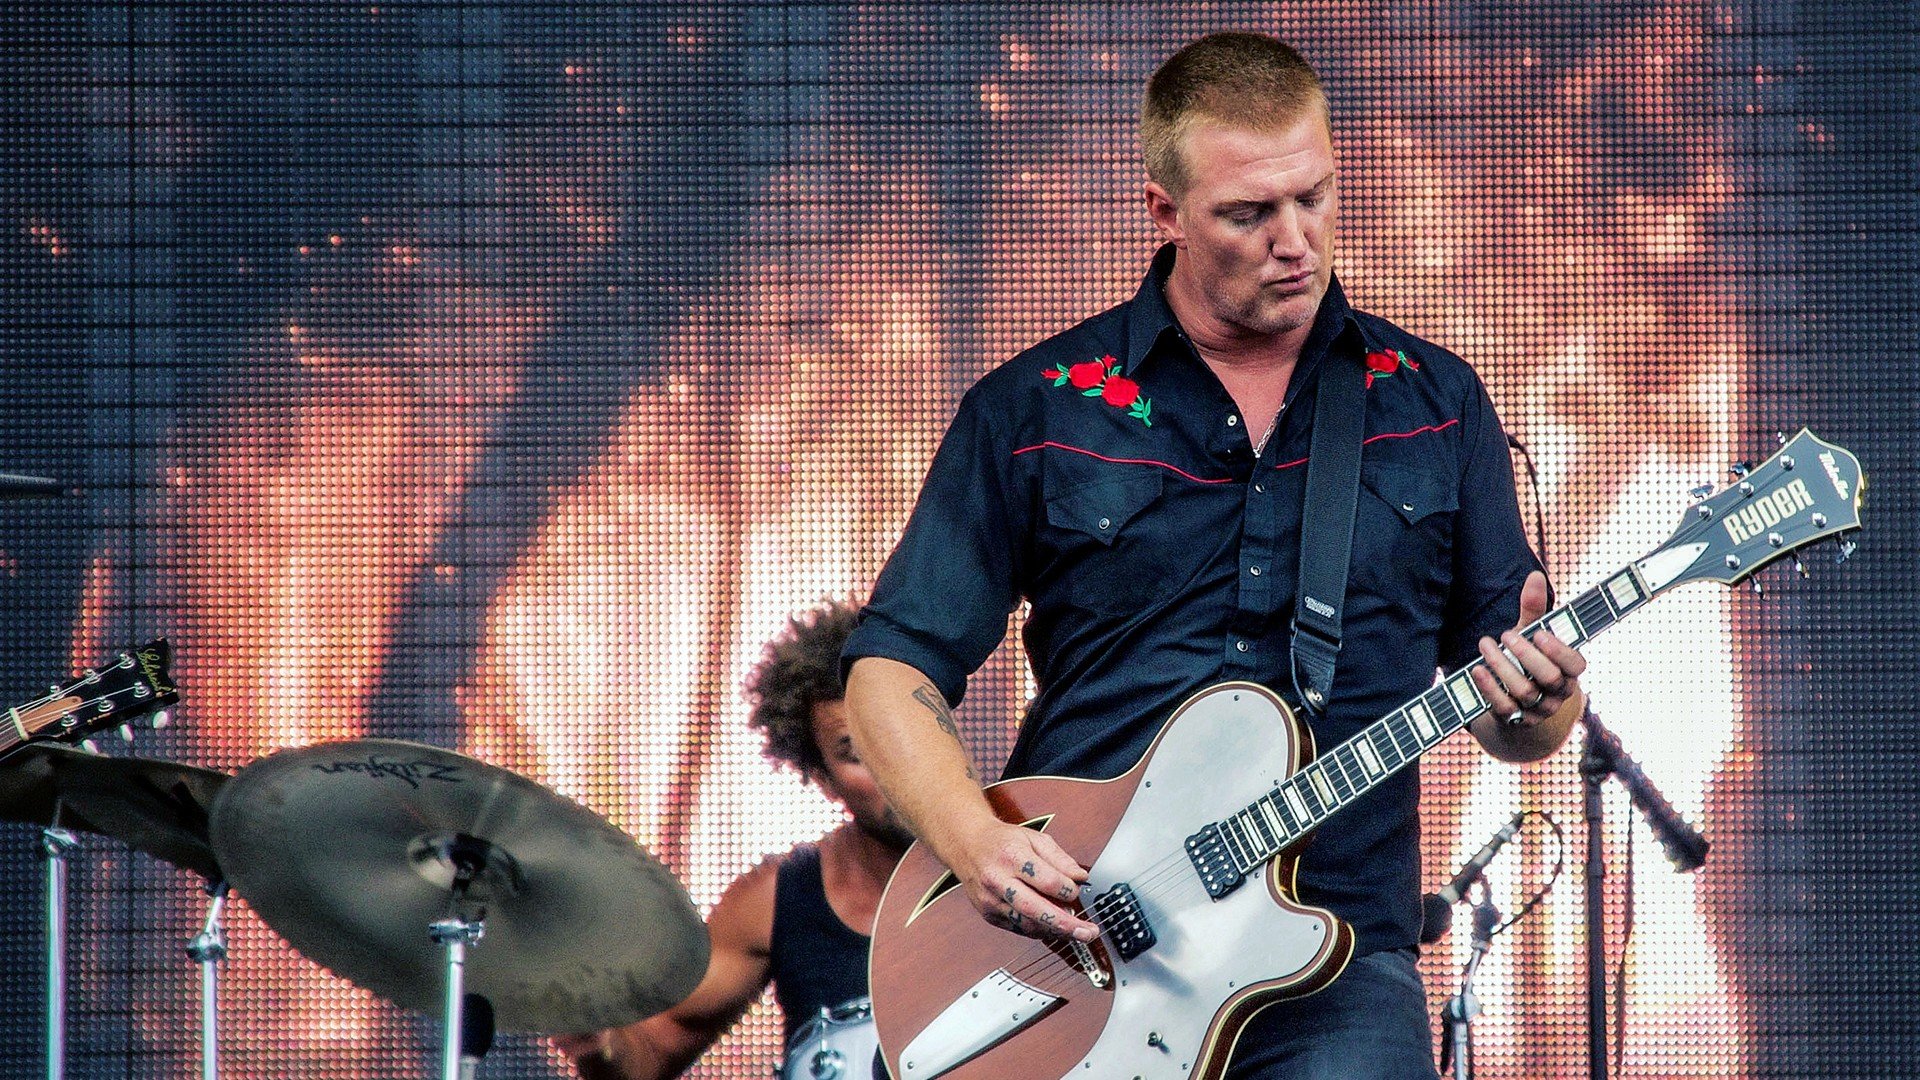 music, Queens, Of, The, Stone, Age, Guitars, Drum, Set, Band, Concert, Josh, Homme, Jon, Theodore Wallpaper